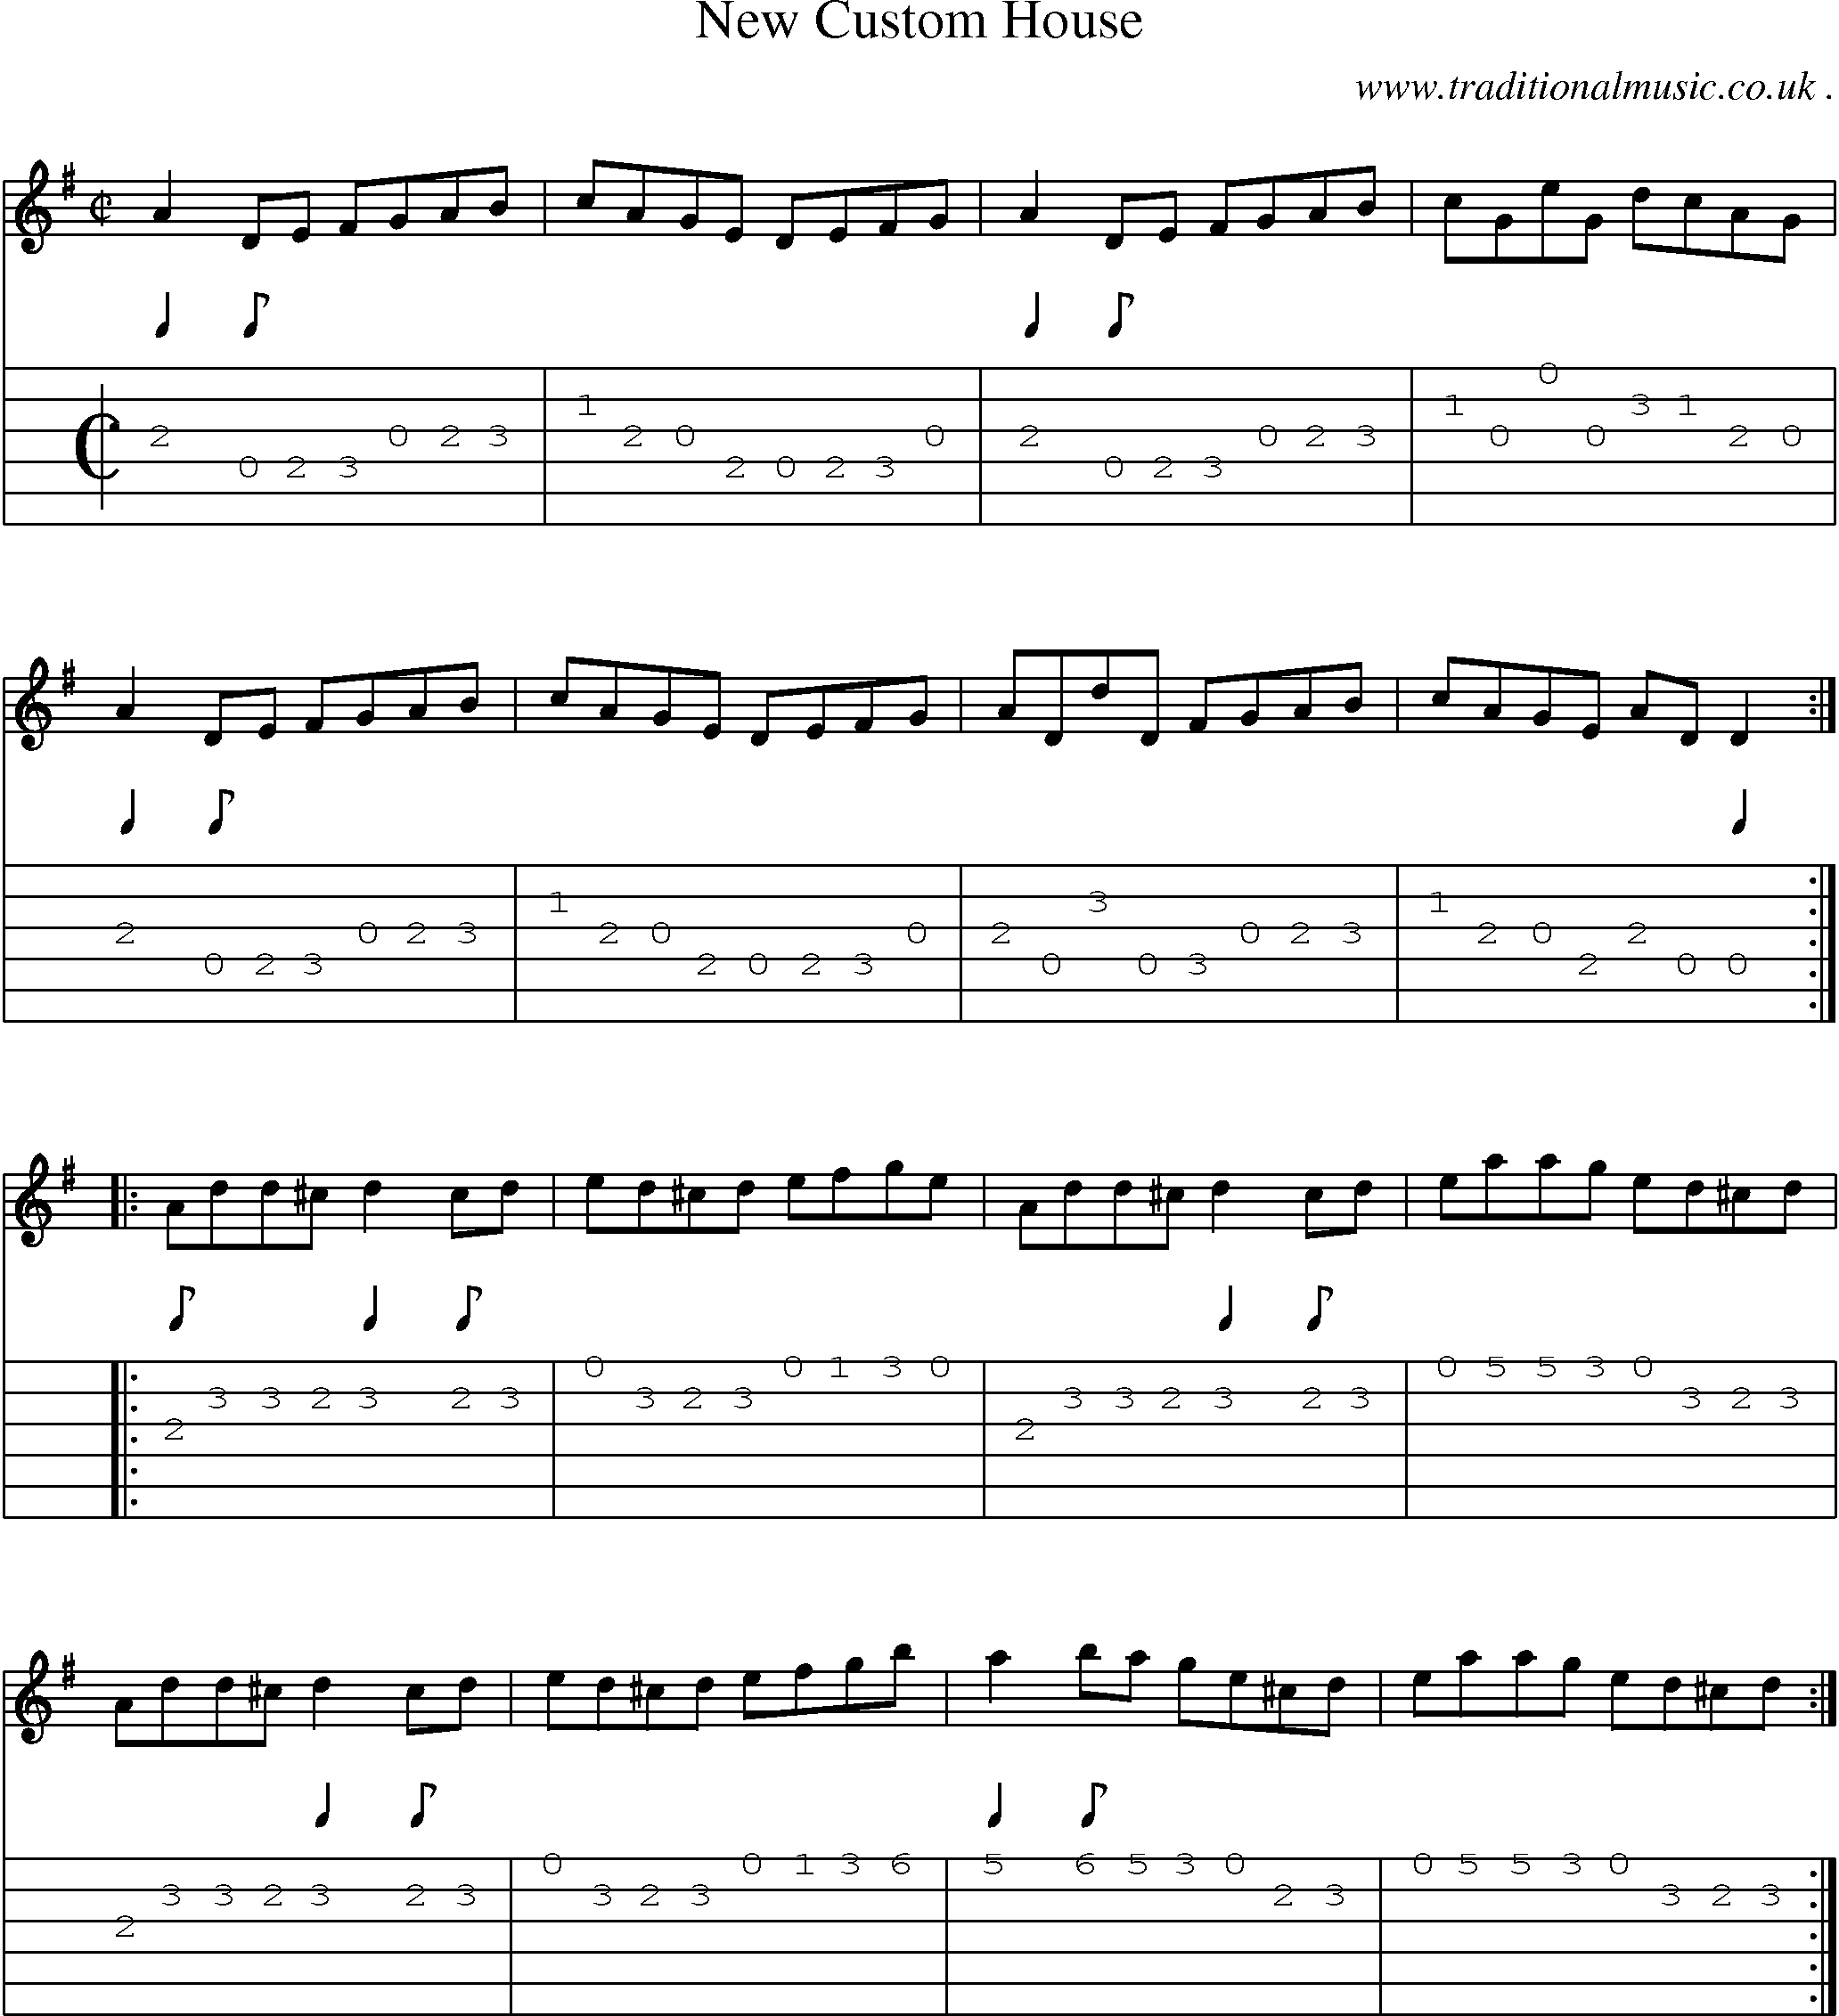 Sheet-Music and Guitar Tabs for New Custom House